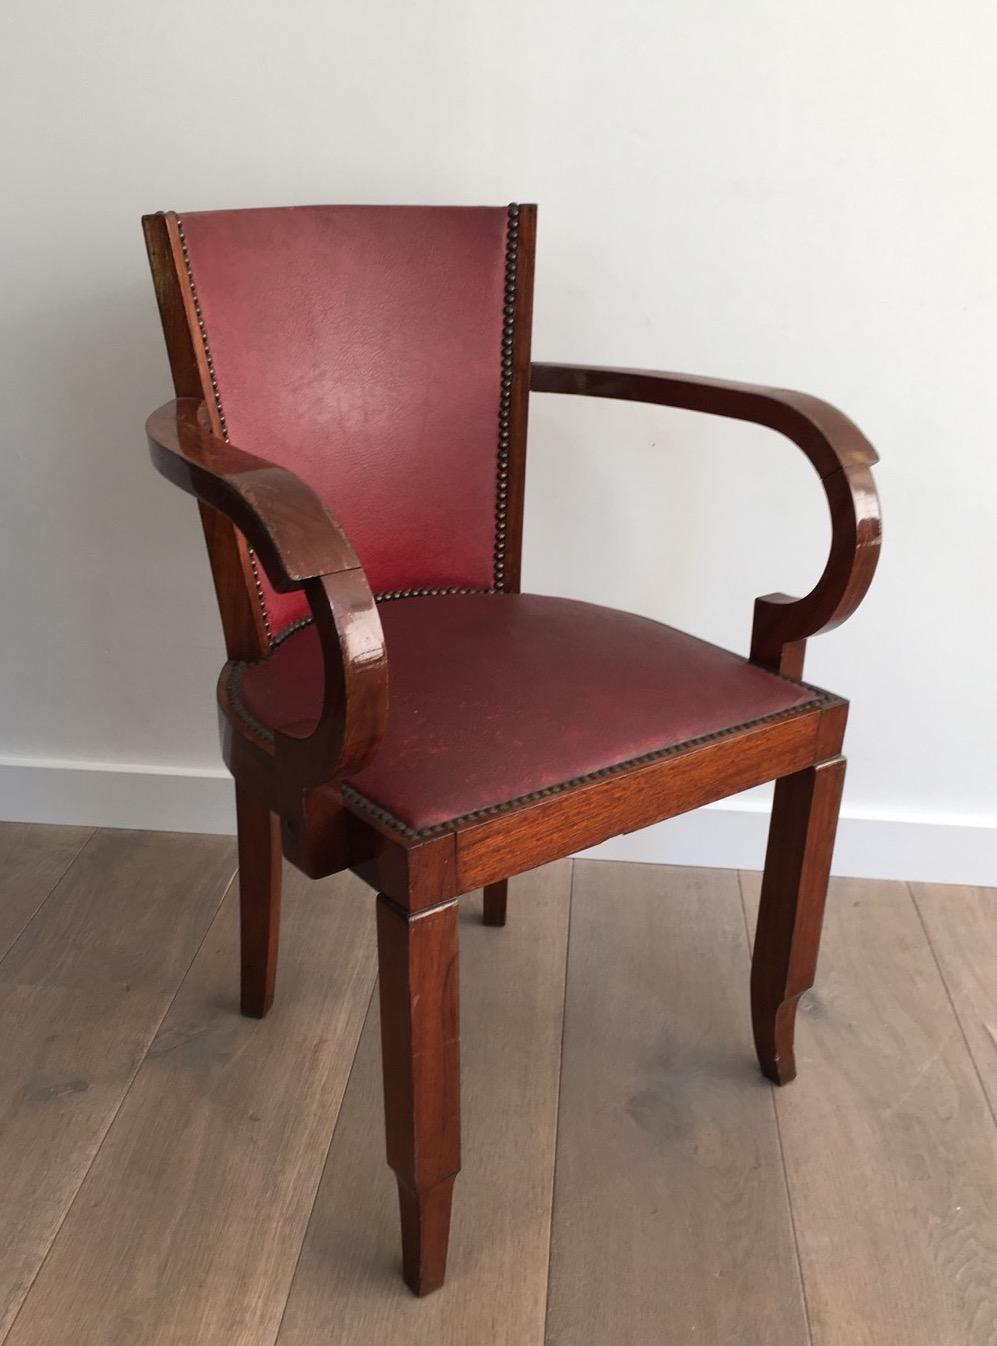 Faux Leather Rare Set of 8 Mahogany and Faux-Leather Art Deco Armchairs, French, circa 1930 For Sale